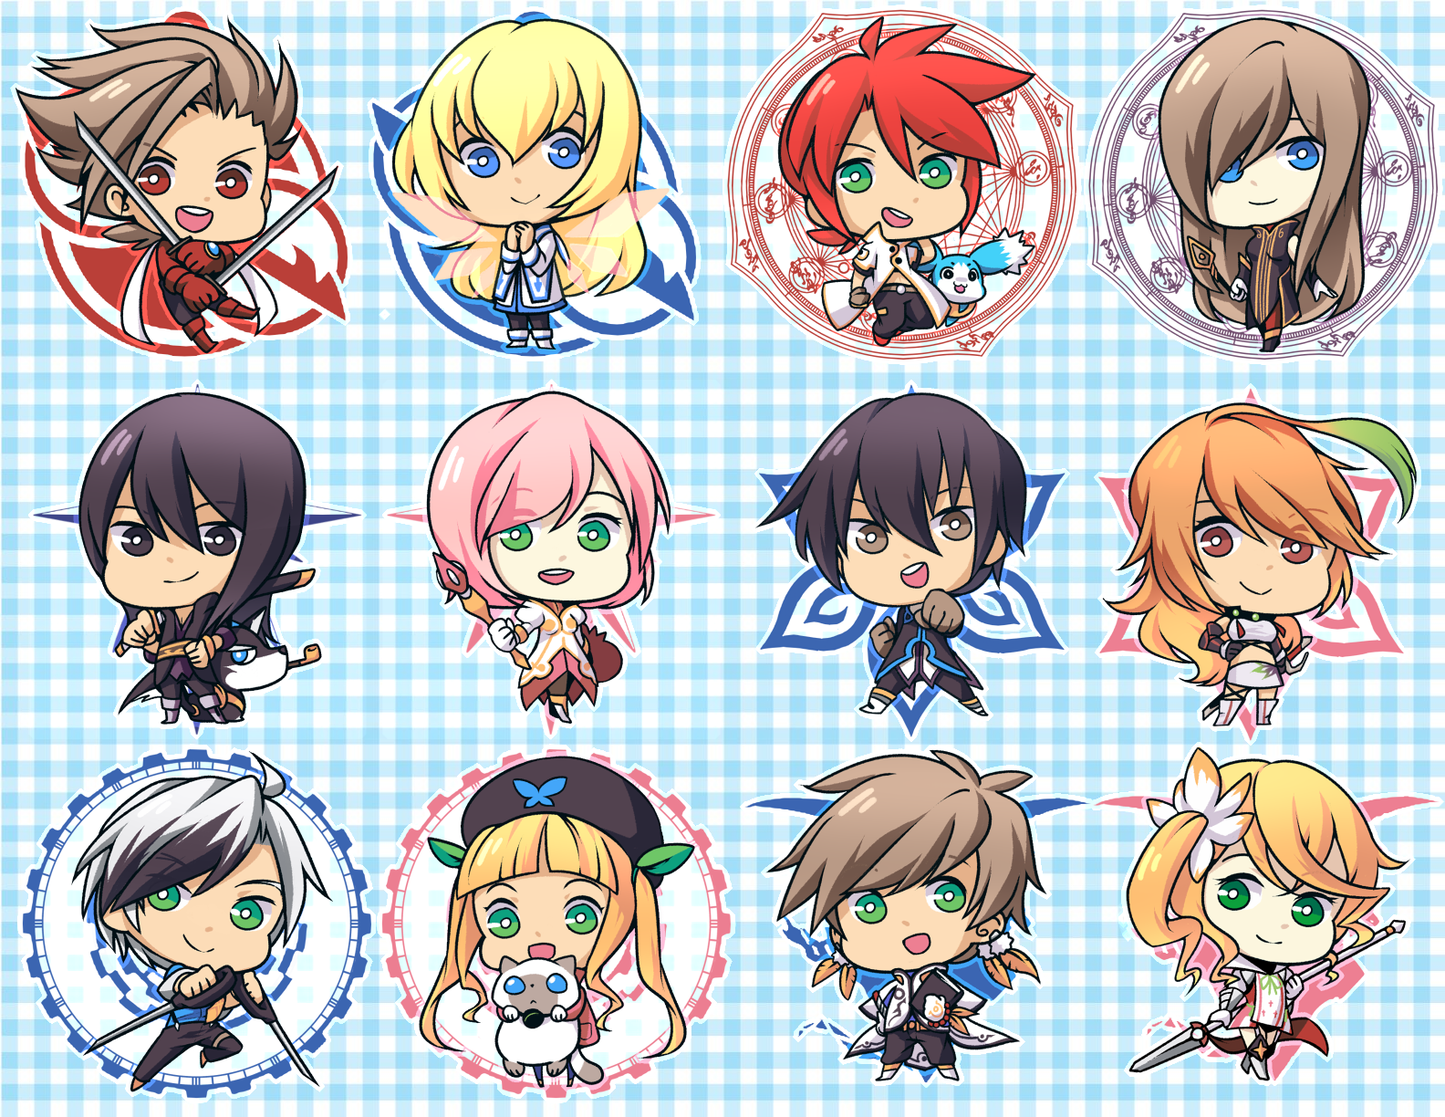 [SALE] Tales Series Charms - 1.5" Double-sided Clear Acrylic